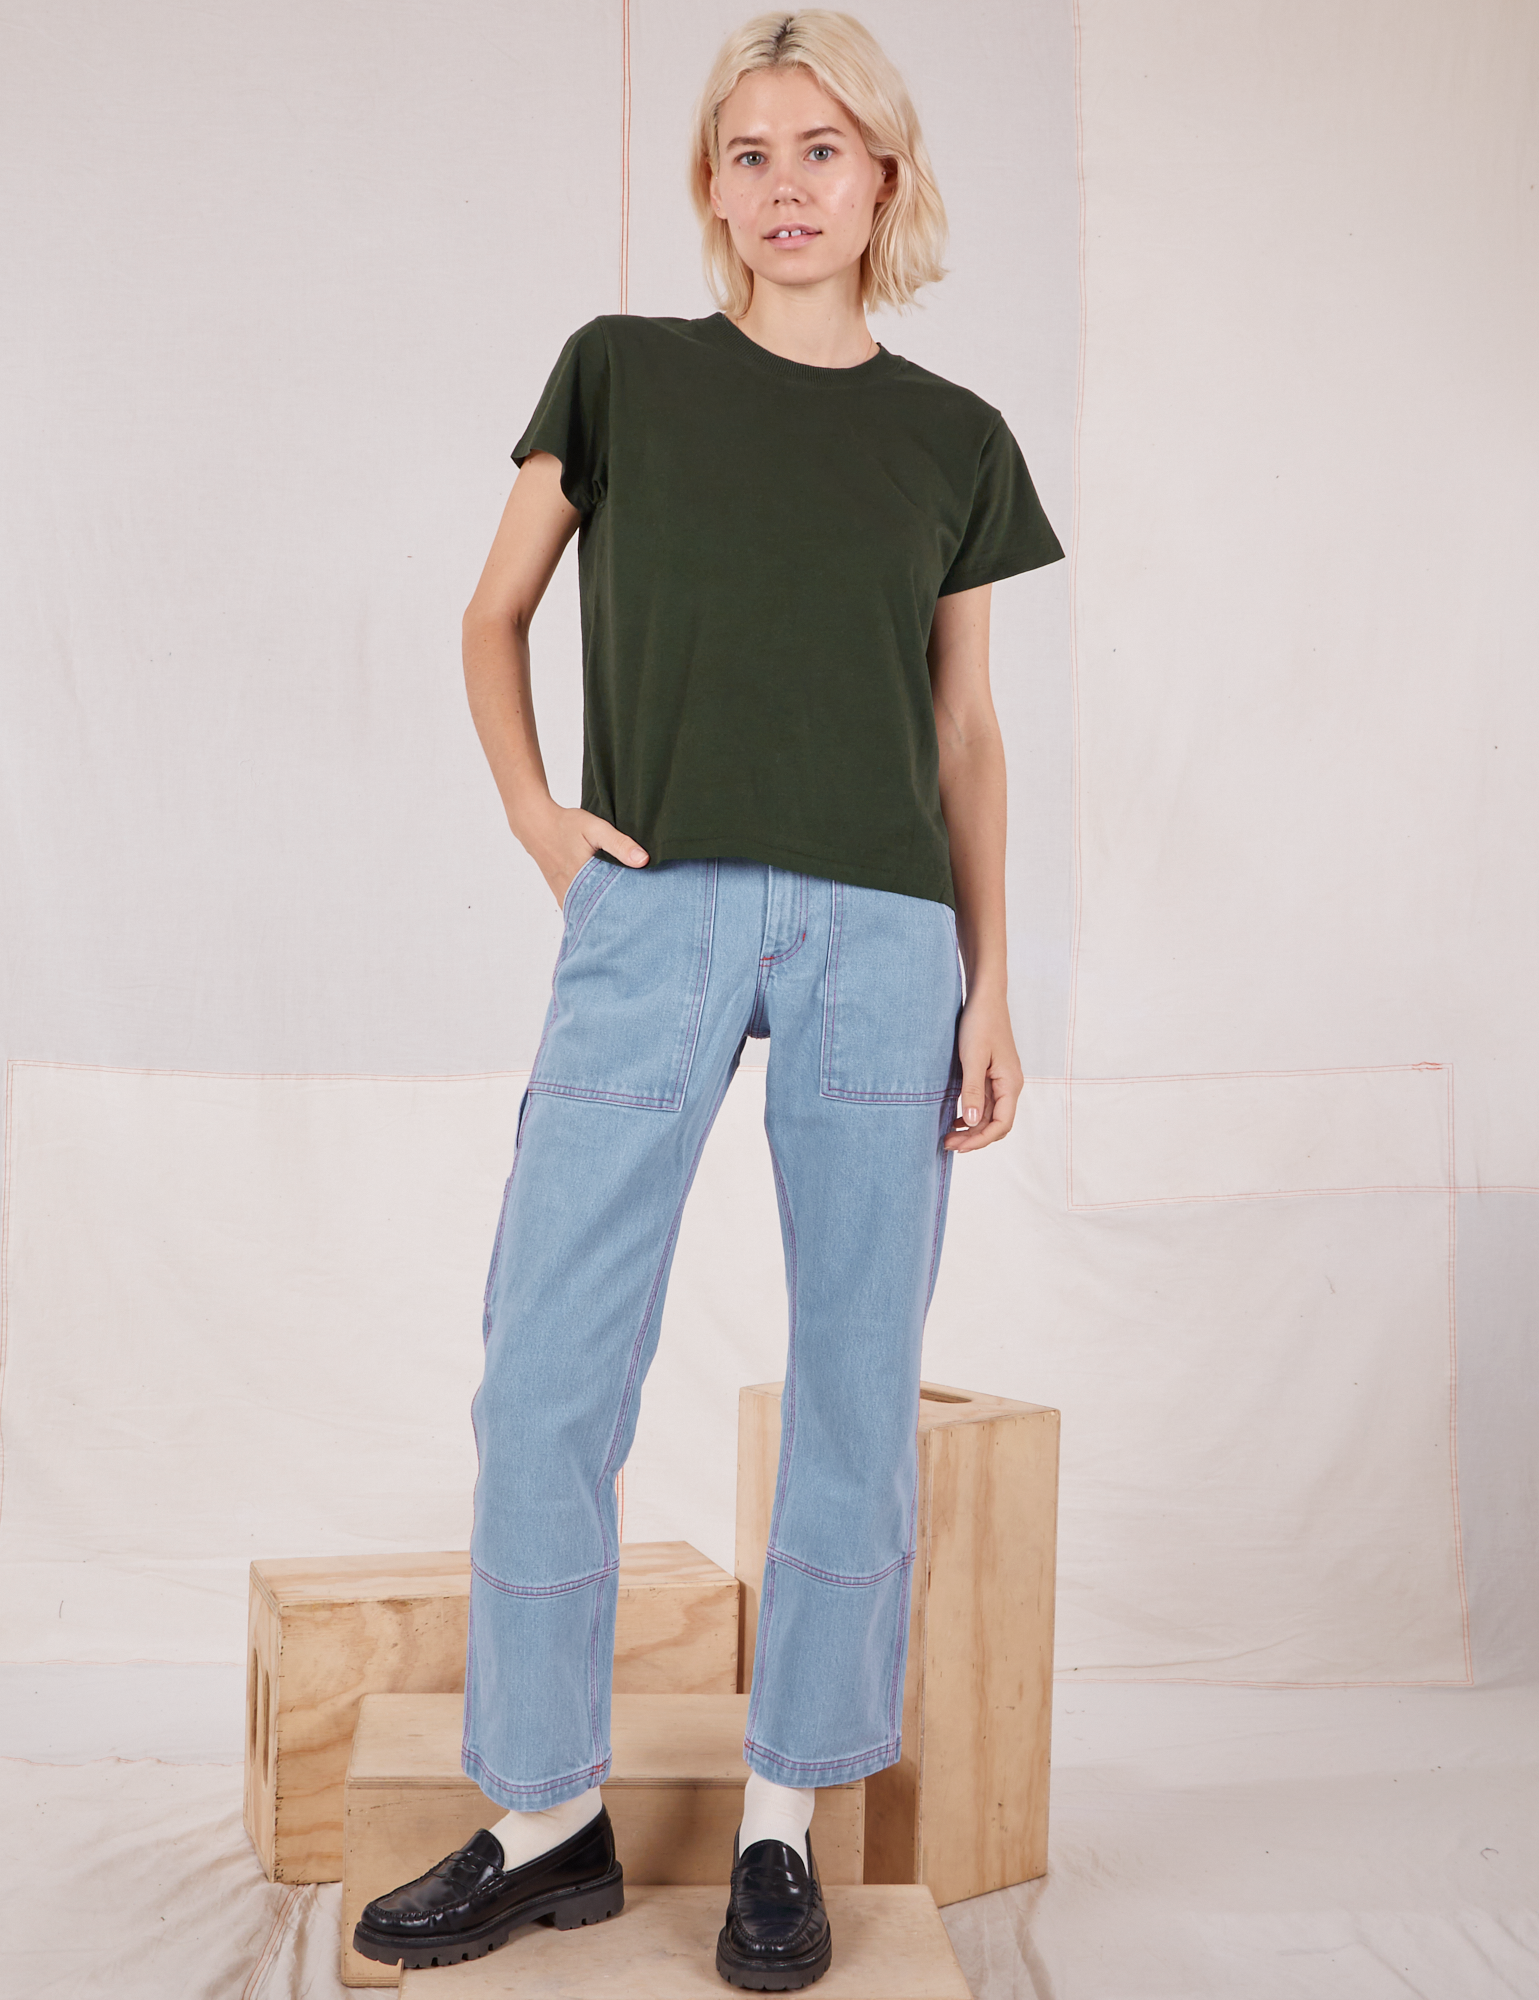 Madeline is wearing Organic Vintage Tee in Swamp Green and light wash Carpenter Jeans